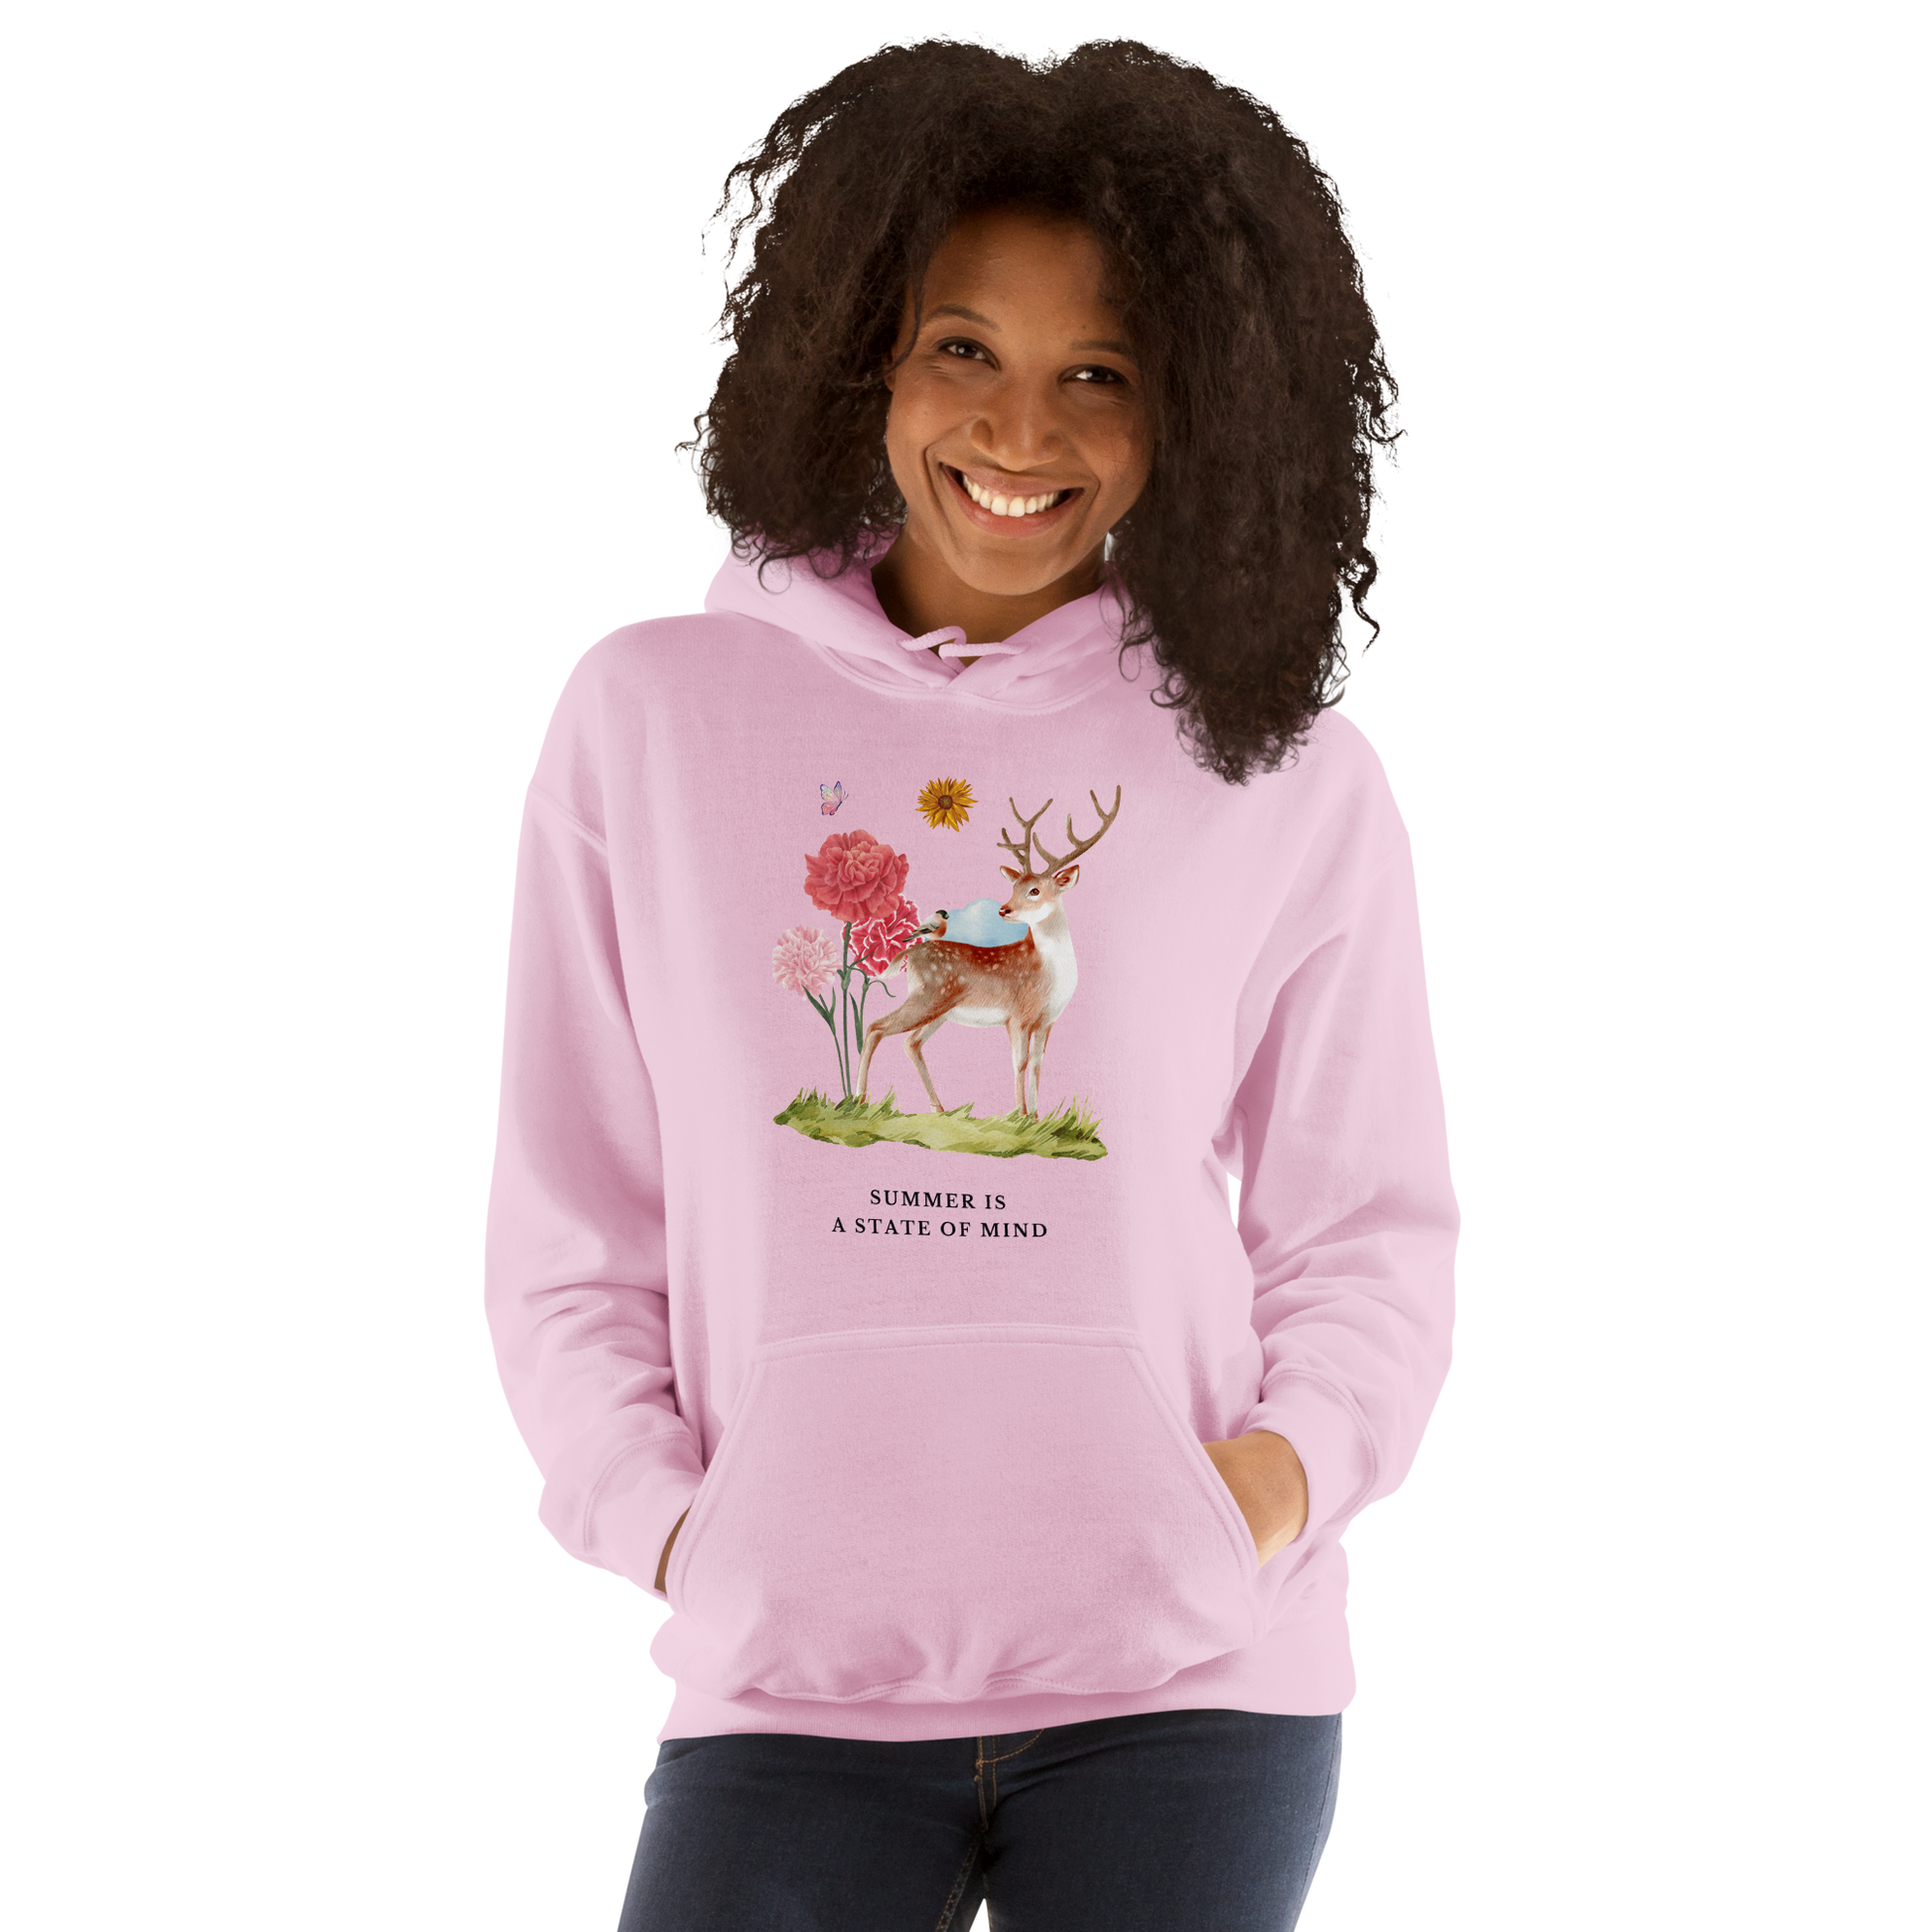 Woman wearing a Light Pink Summer Is a State of Mind Hoodie Featuring a Summer Is a State of Mind graphic on the chest - Cute Graphic Summer Hoodies - Boozy Fox